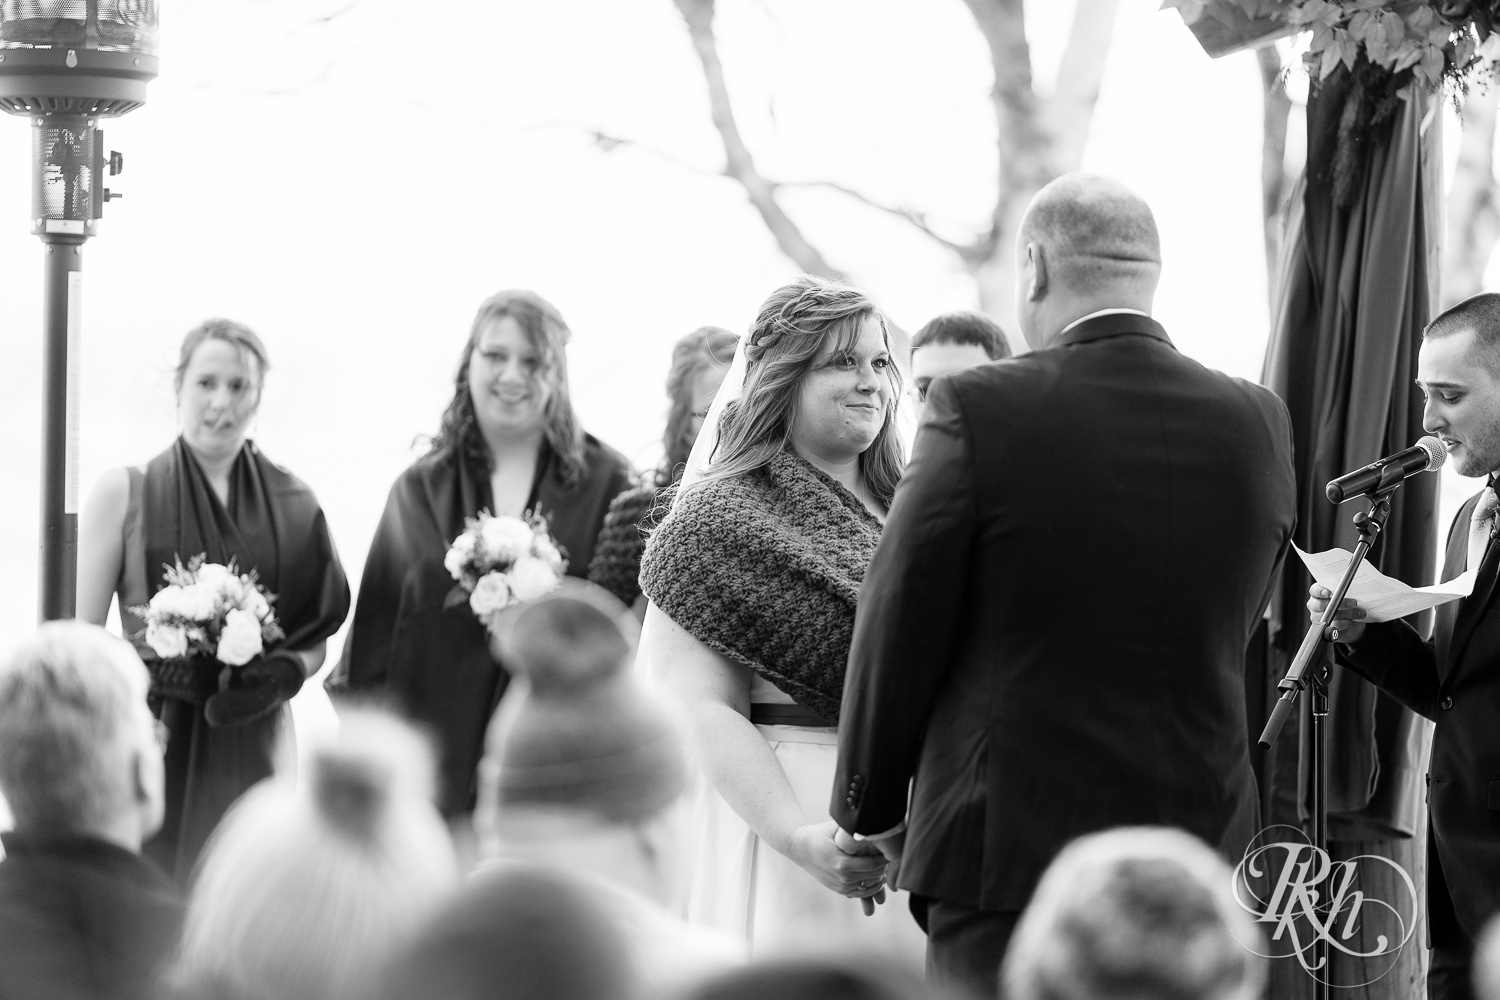 Outdoor winter wedding ceremony in the snow at Grand Superior Lodge in Two Harbors, Minnesota.